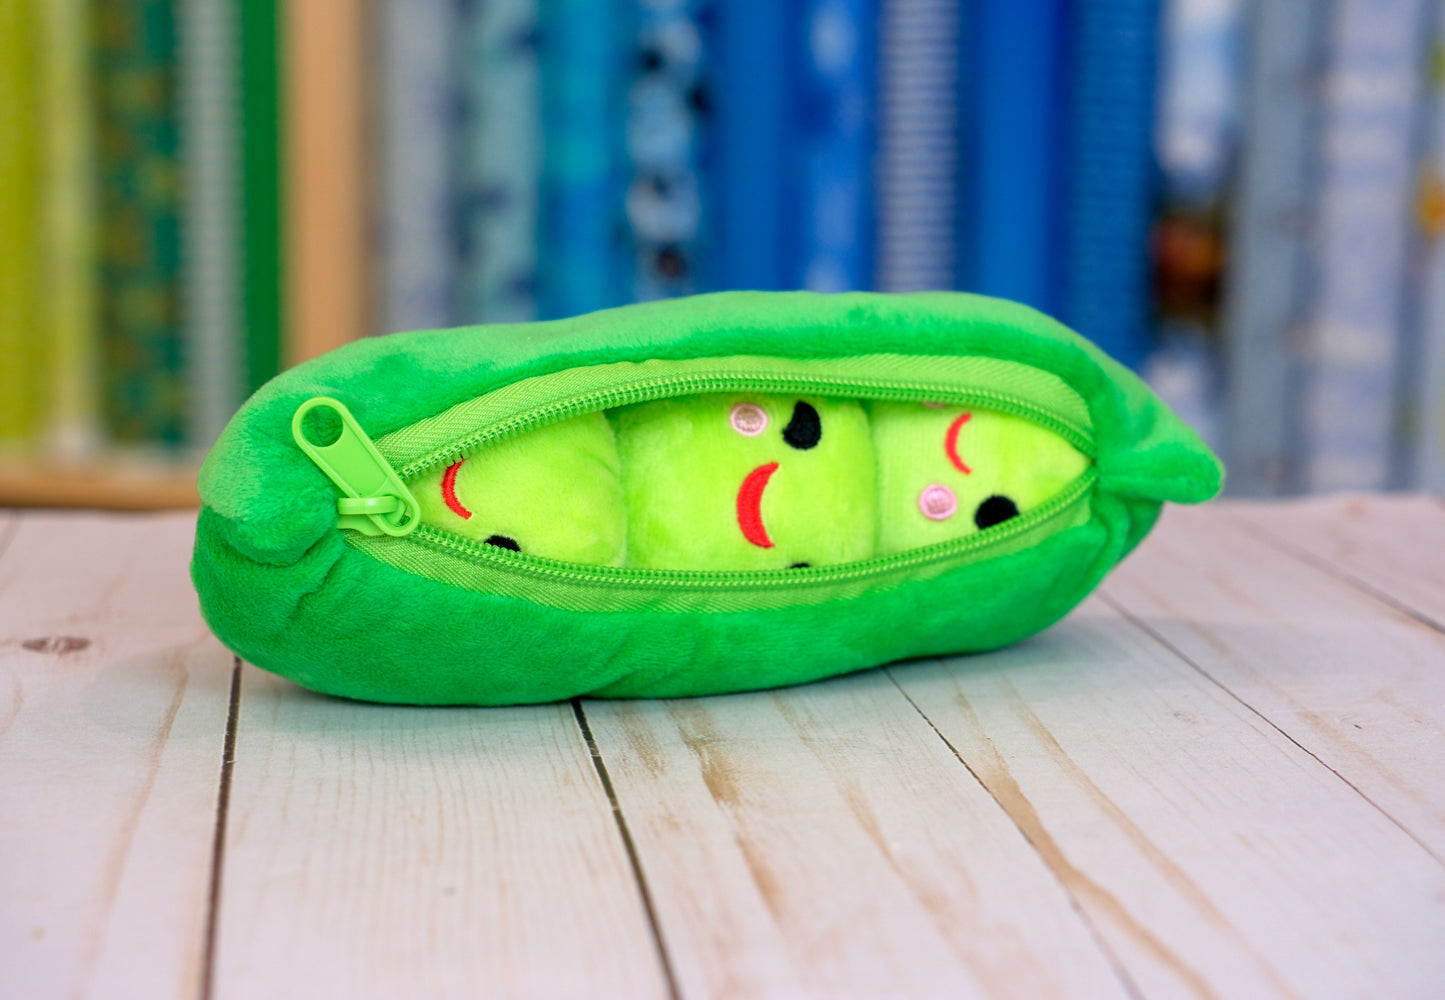 adorable pea plushes with zip pod